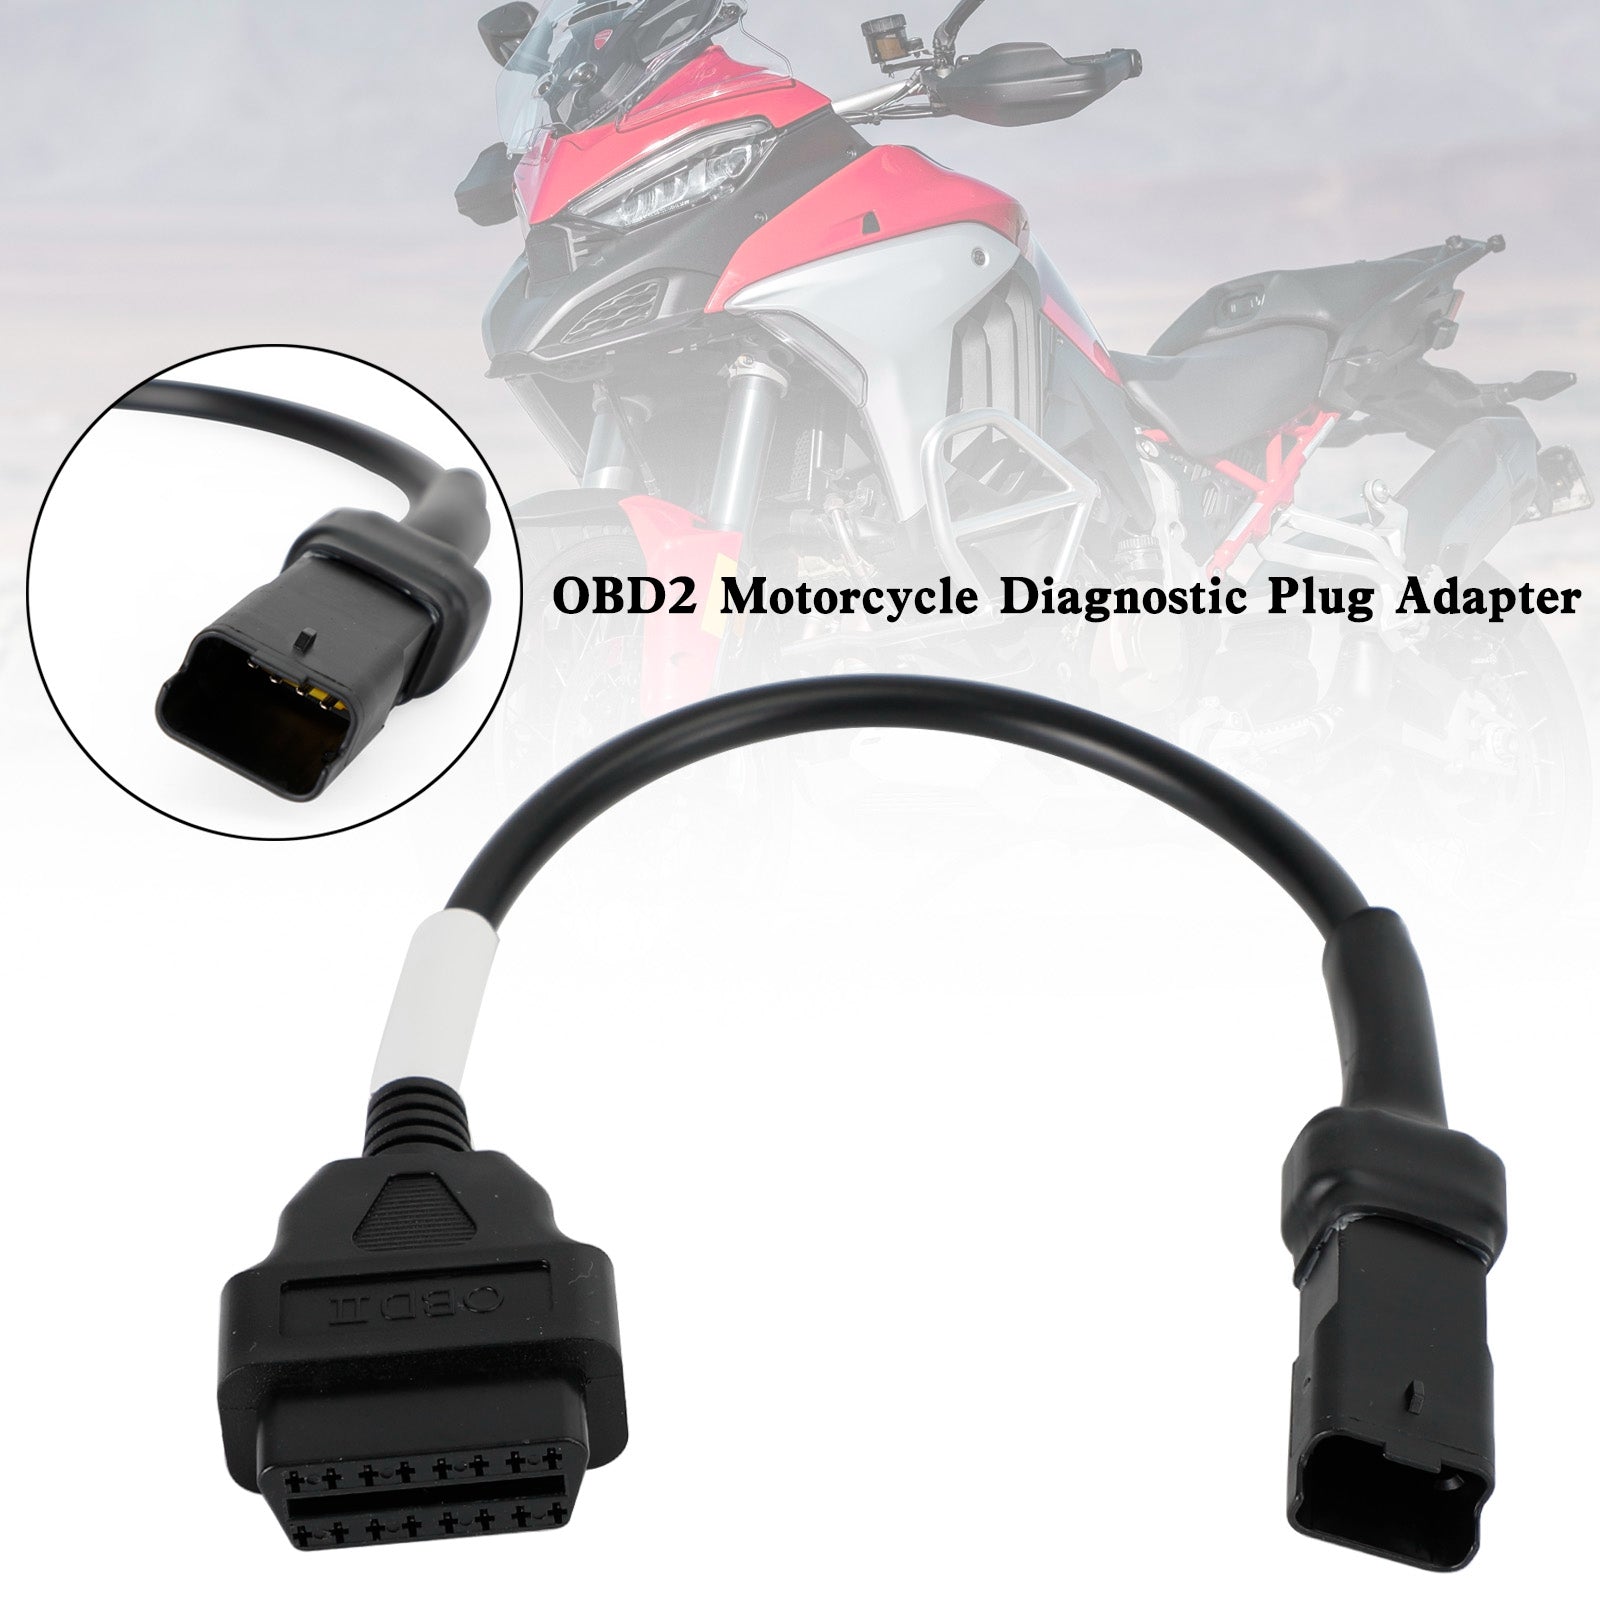 Obd2 Diagnostic Cable, 4 Pin to Obd2 Diagnostic Adapter Connector  Motorcycle Scanner Diagnostic Cable fit for Yamaha Popular